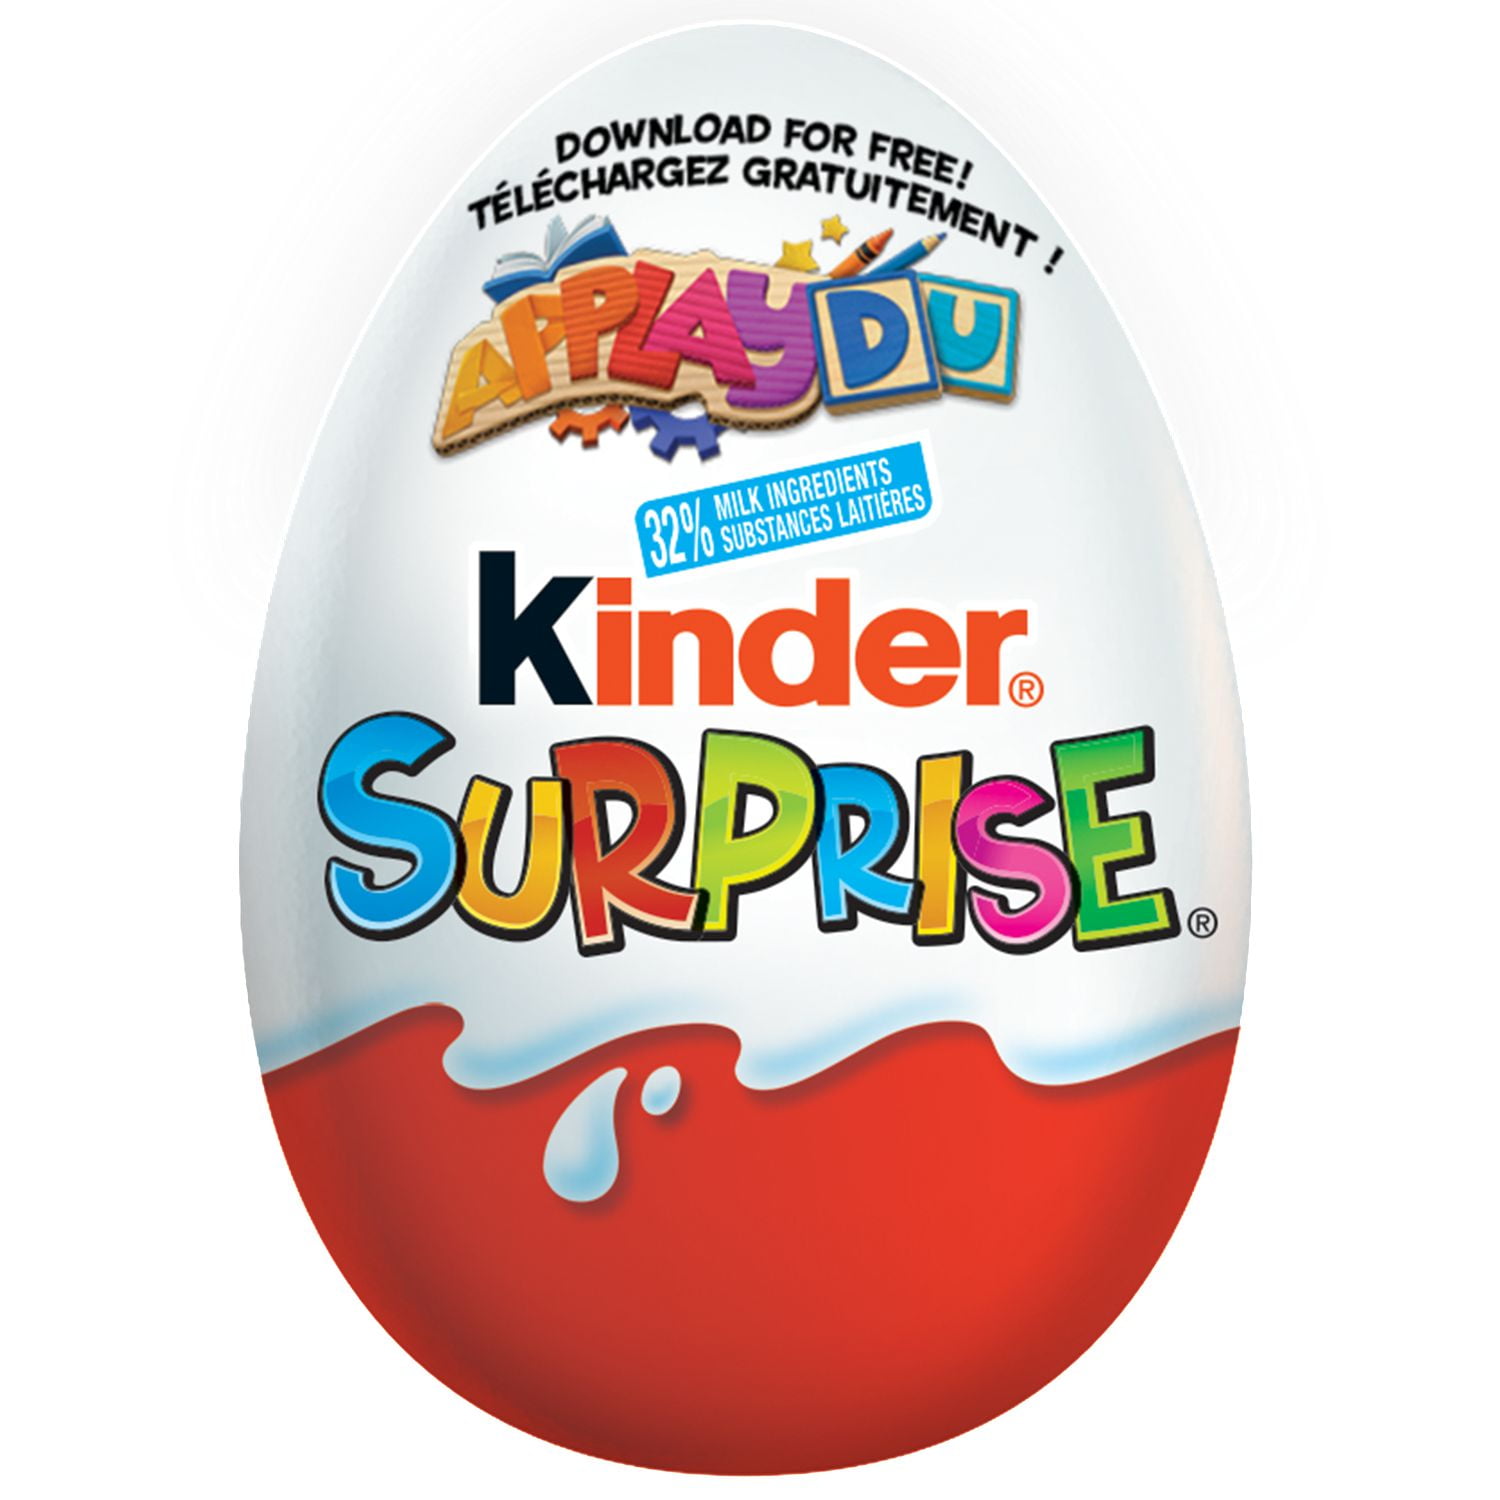 KINDER SURPRISE® Milk Chocolate Eggs with Toy, Classic, 1 Egg, 20